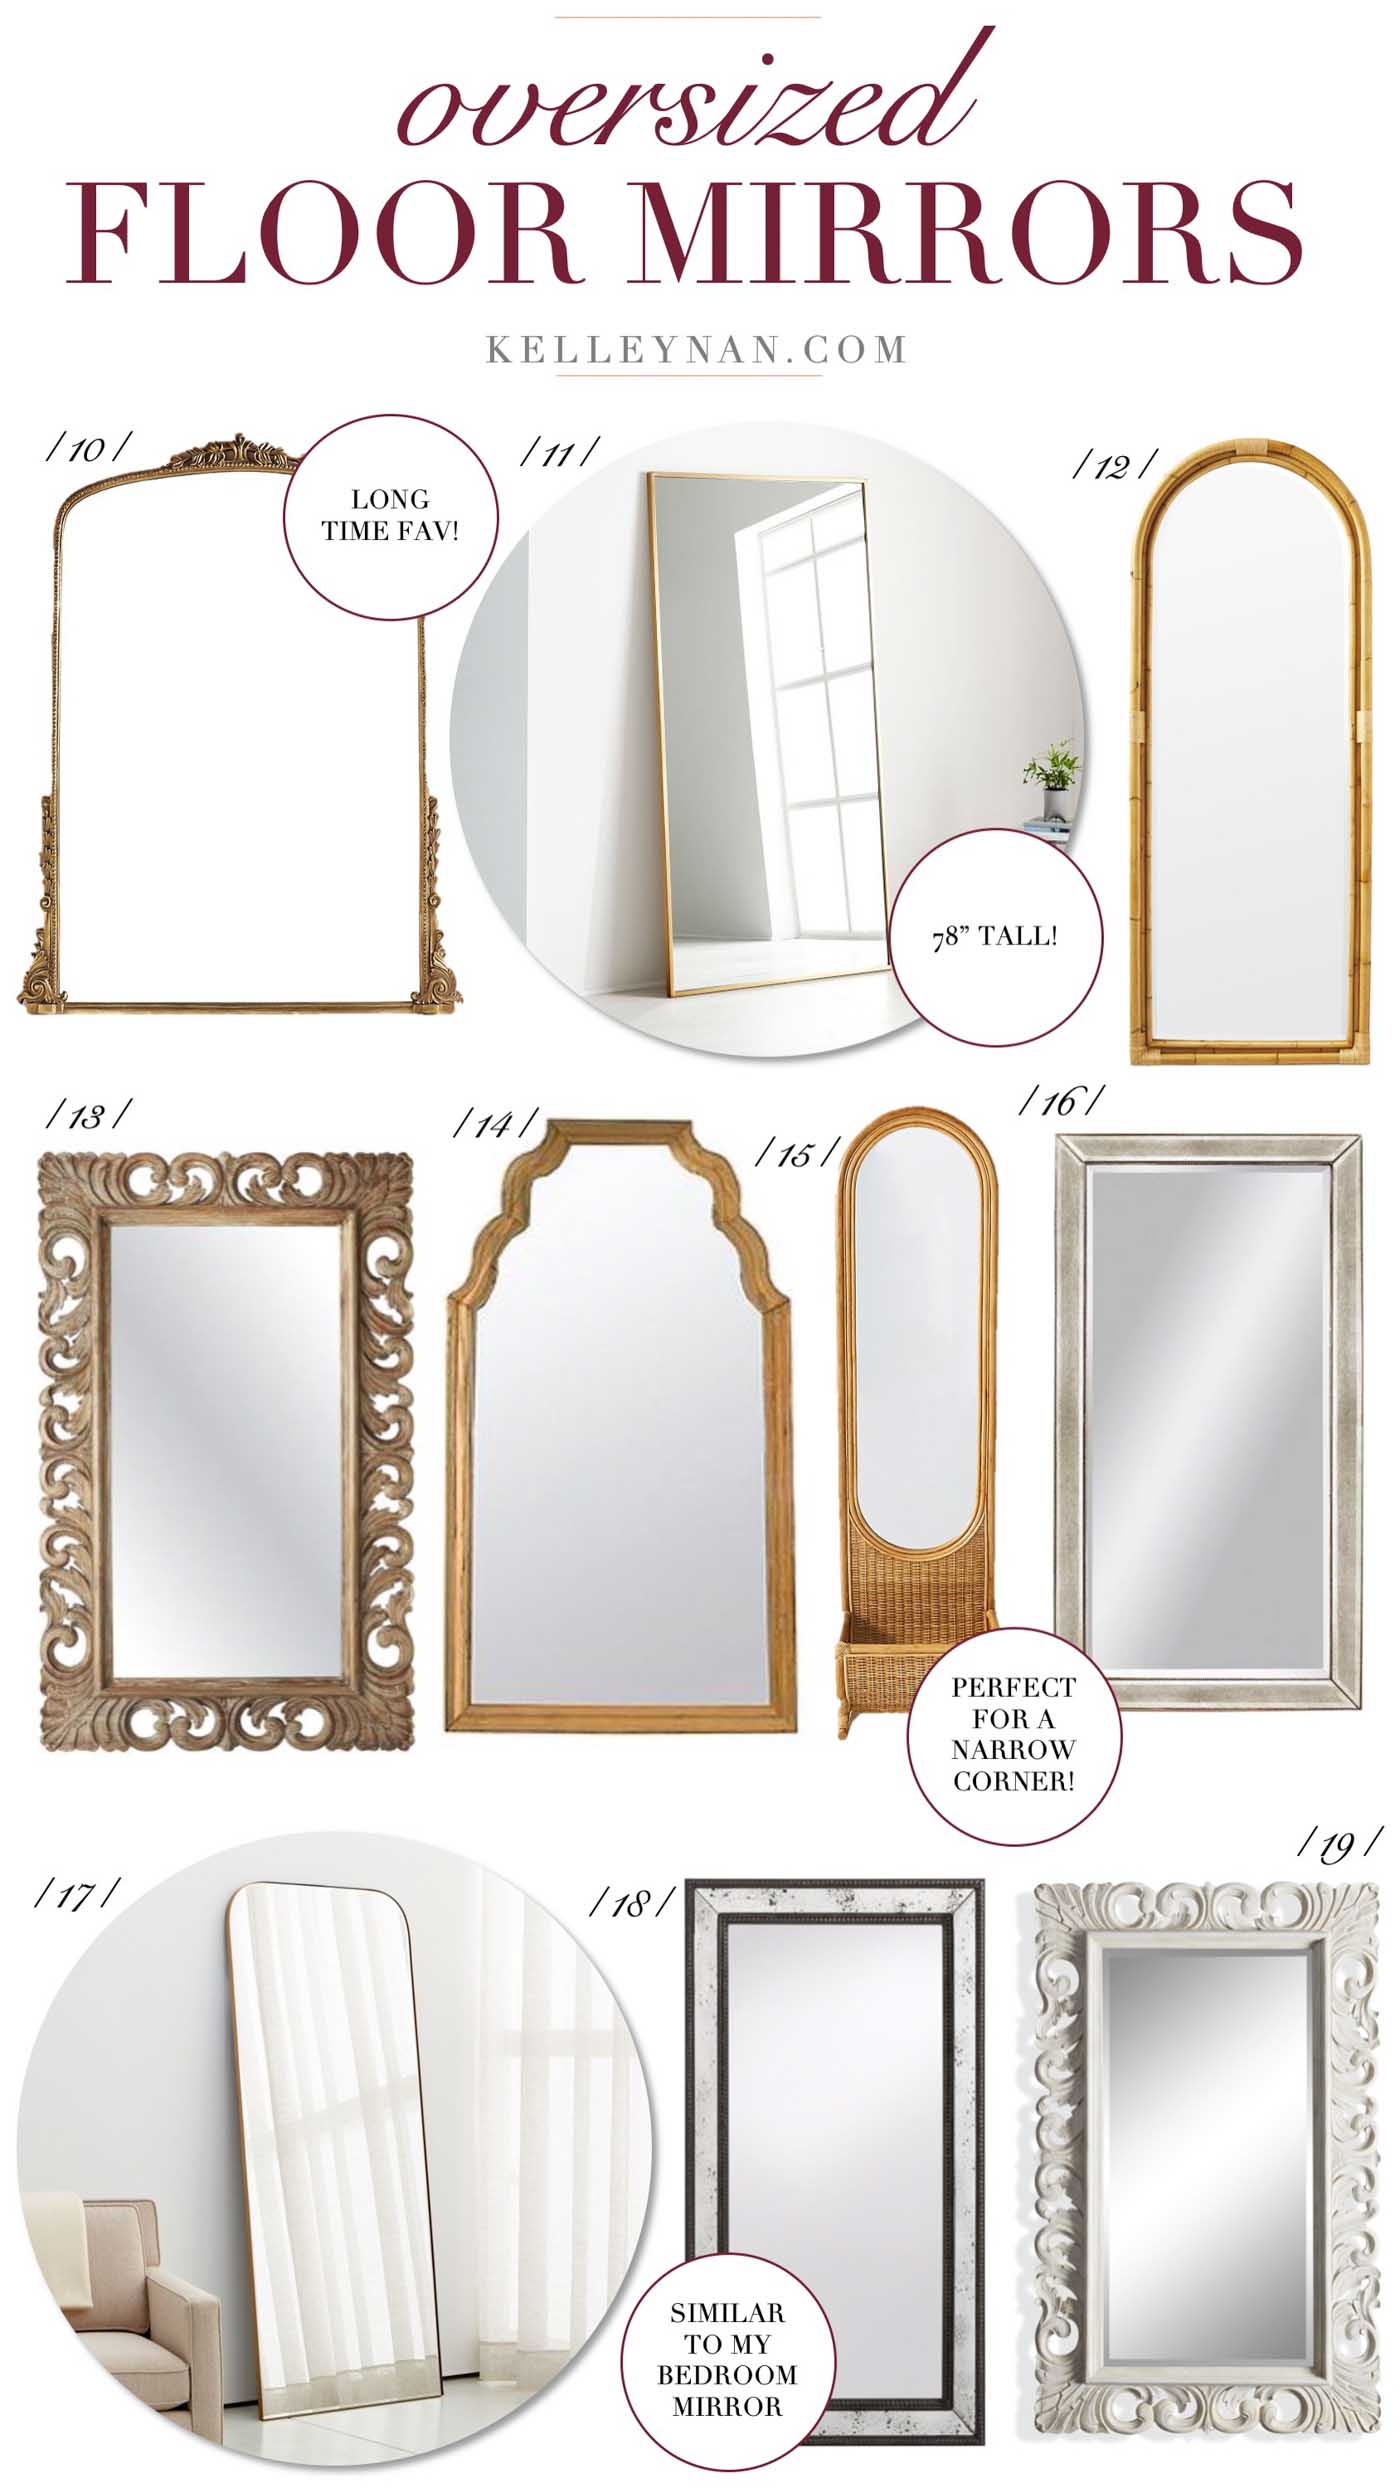 19 Oversized Floor Mirrors To Check Out, How Tall Are Floor Mirrors